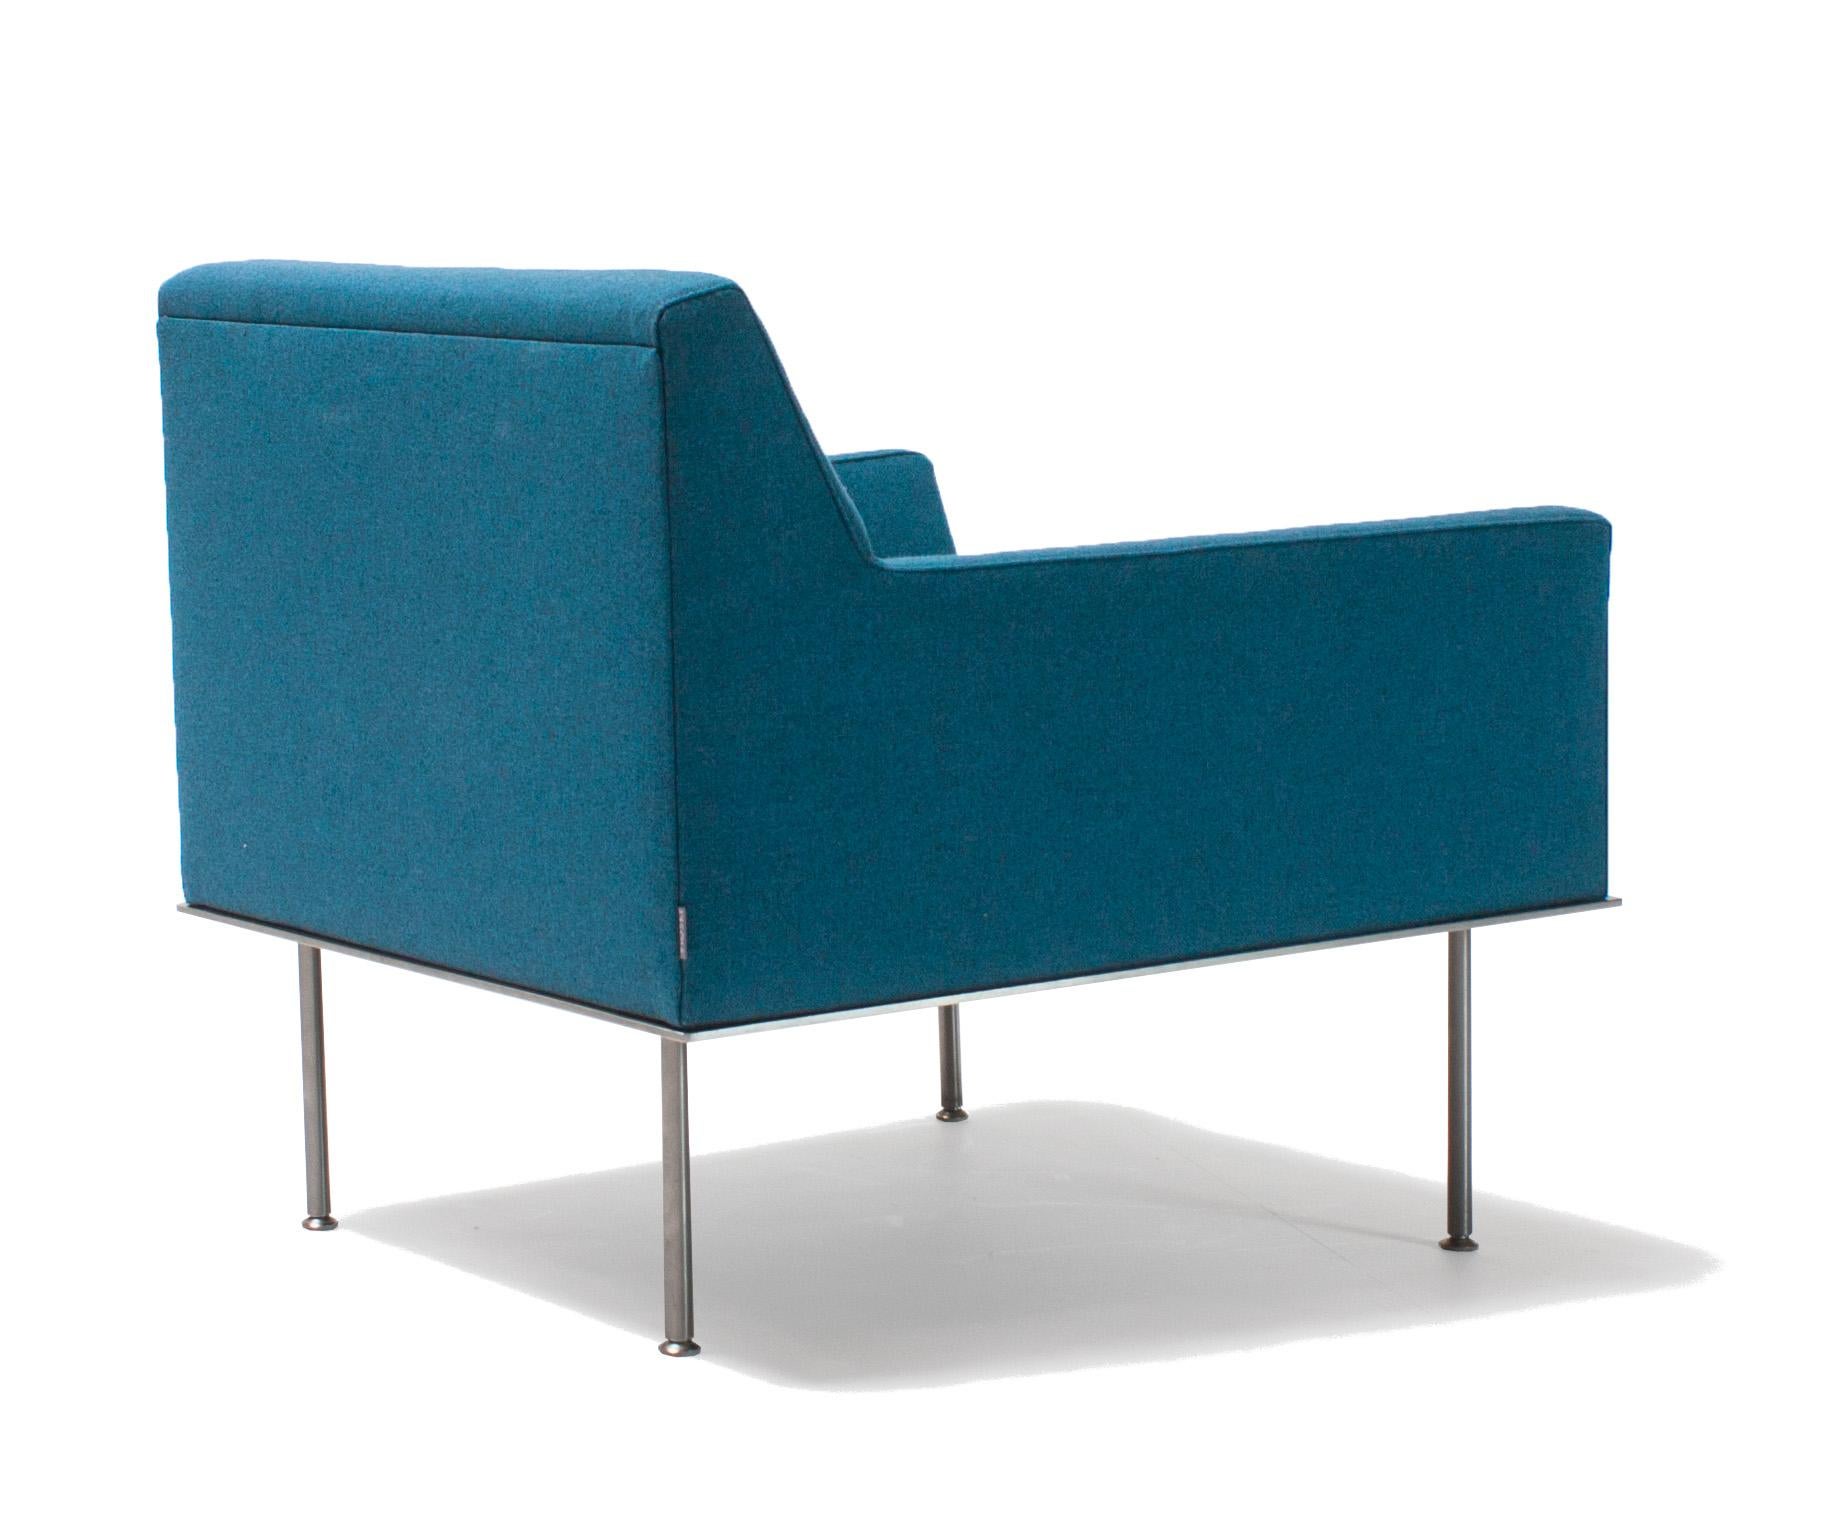 American Vioski New Century Modern Angeles Lounge Chair in Reef Bright Blue For Sale